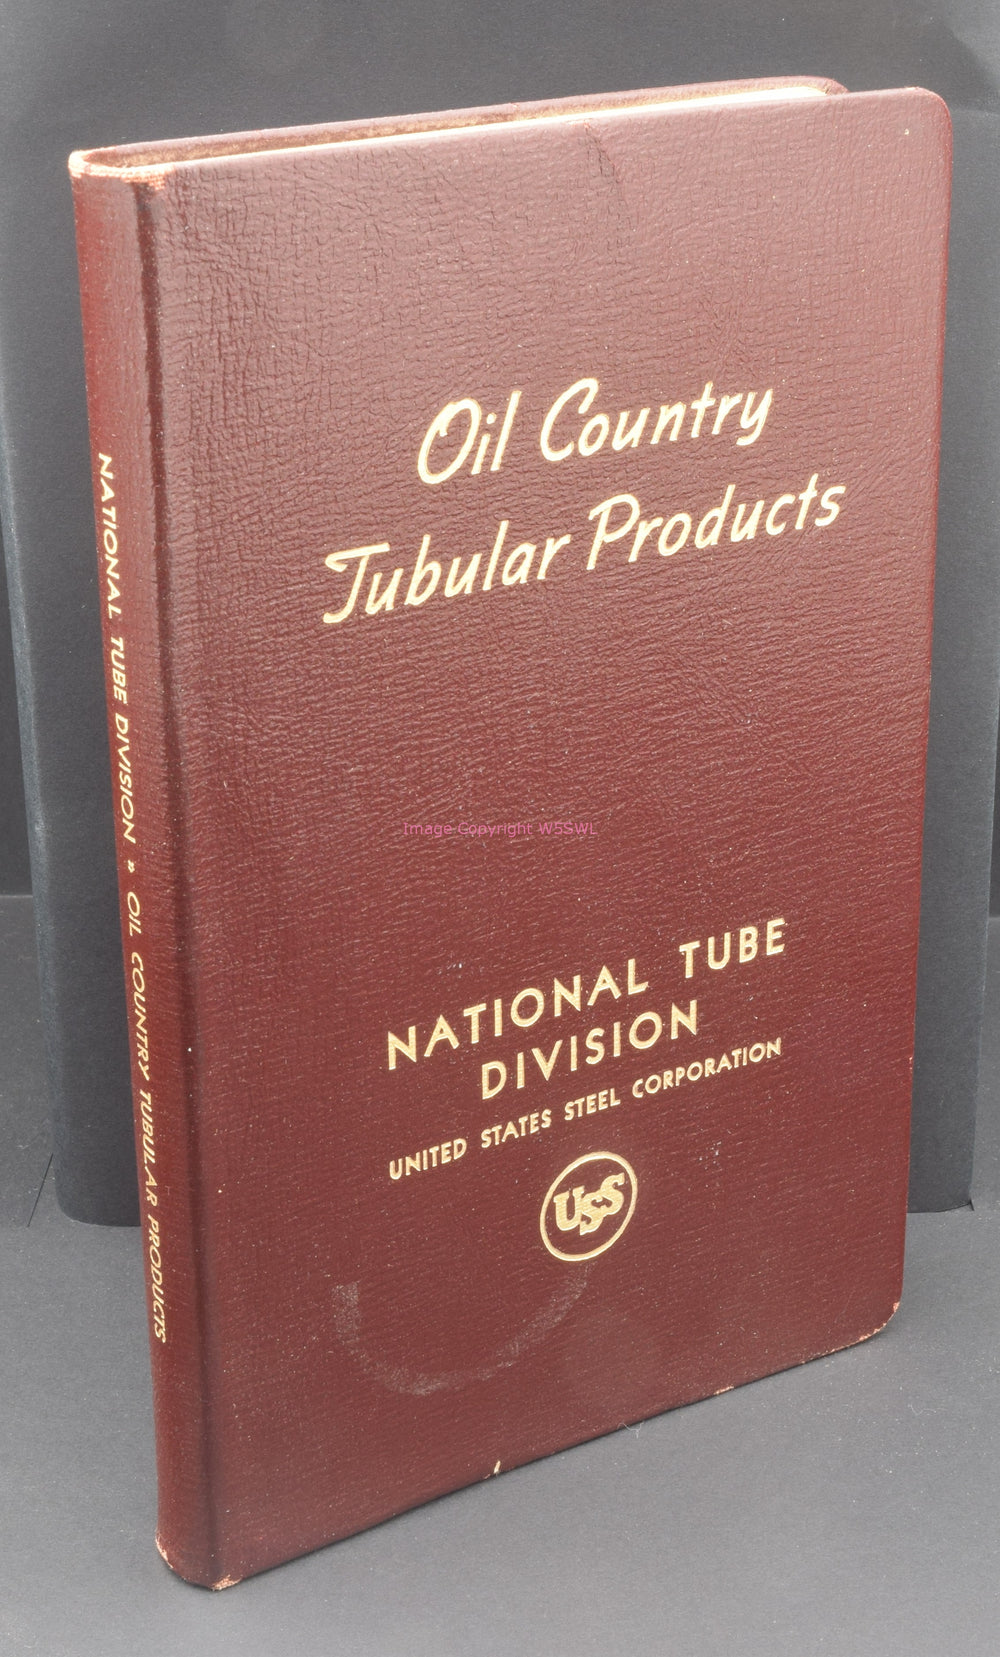 1954 Oil Country Tubular Products National Tube Division US Steel Corp - Dave's Hobby Shop by W5SWL